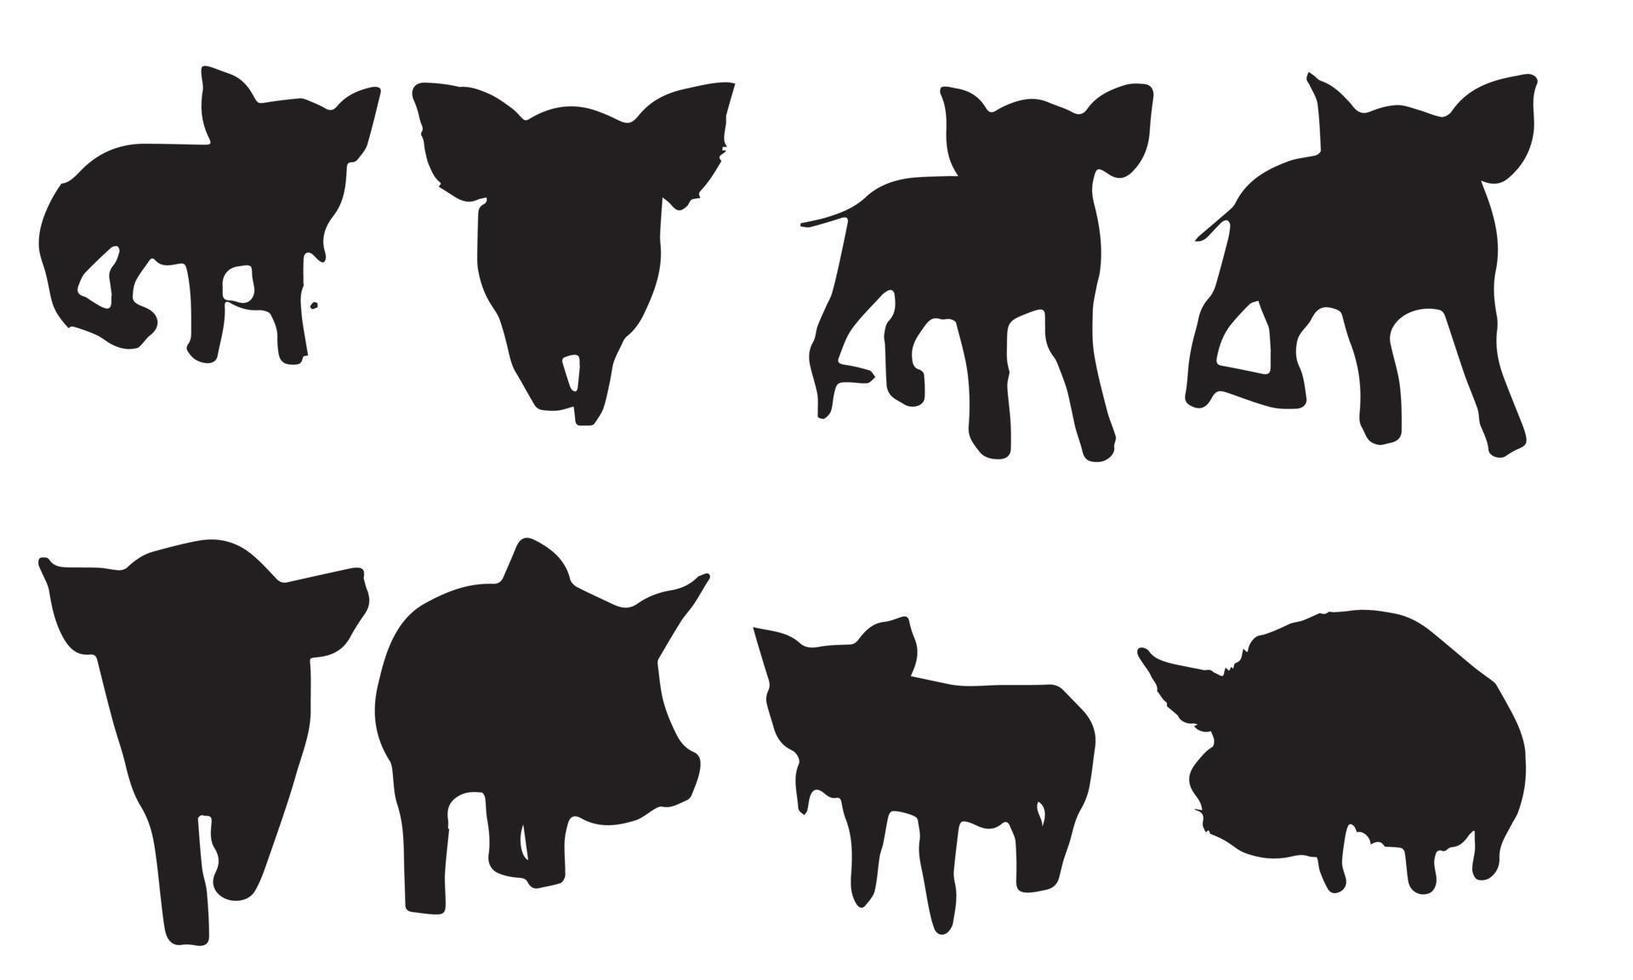 pig vector illustration design black and white collection